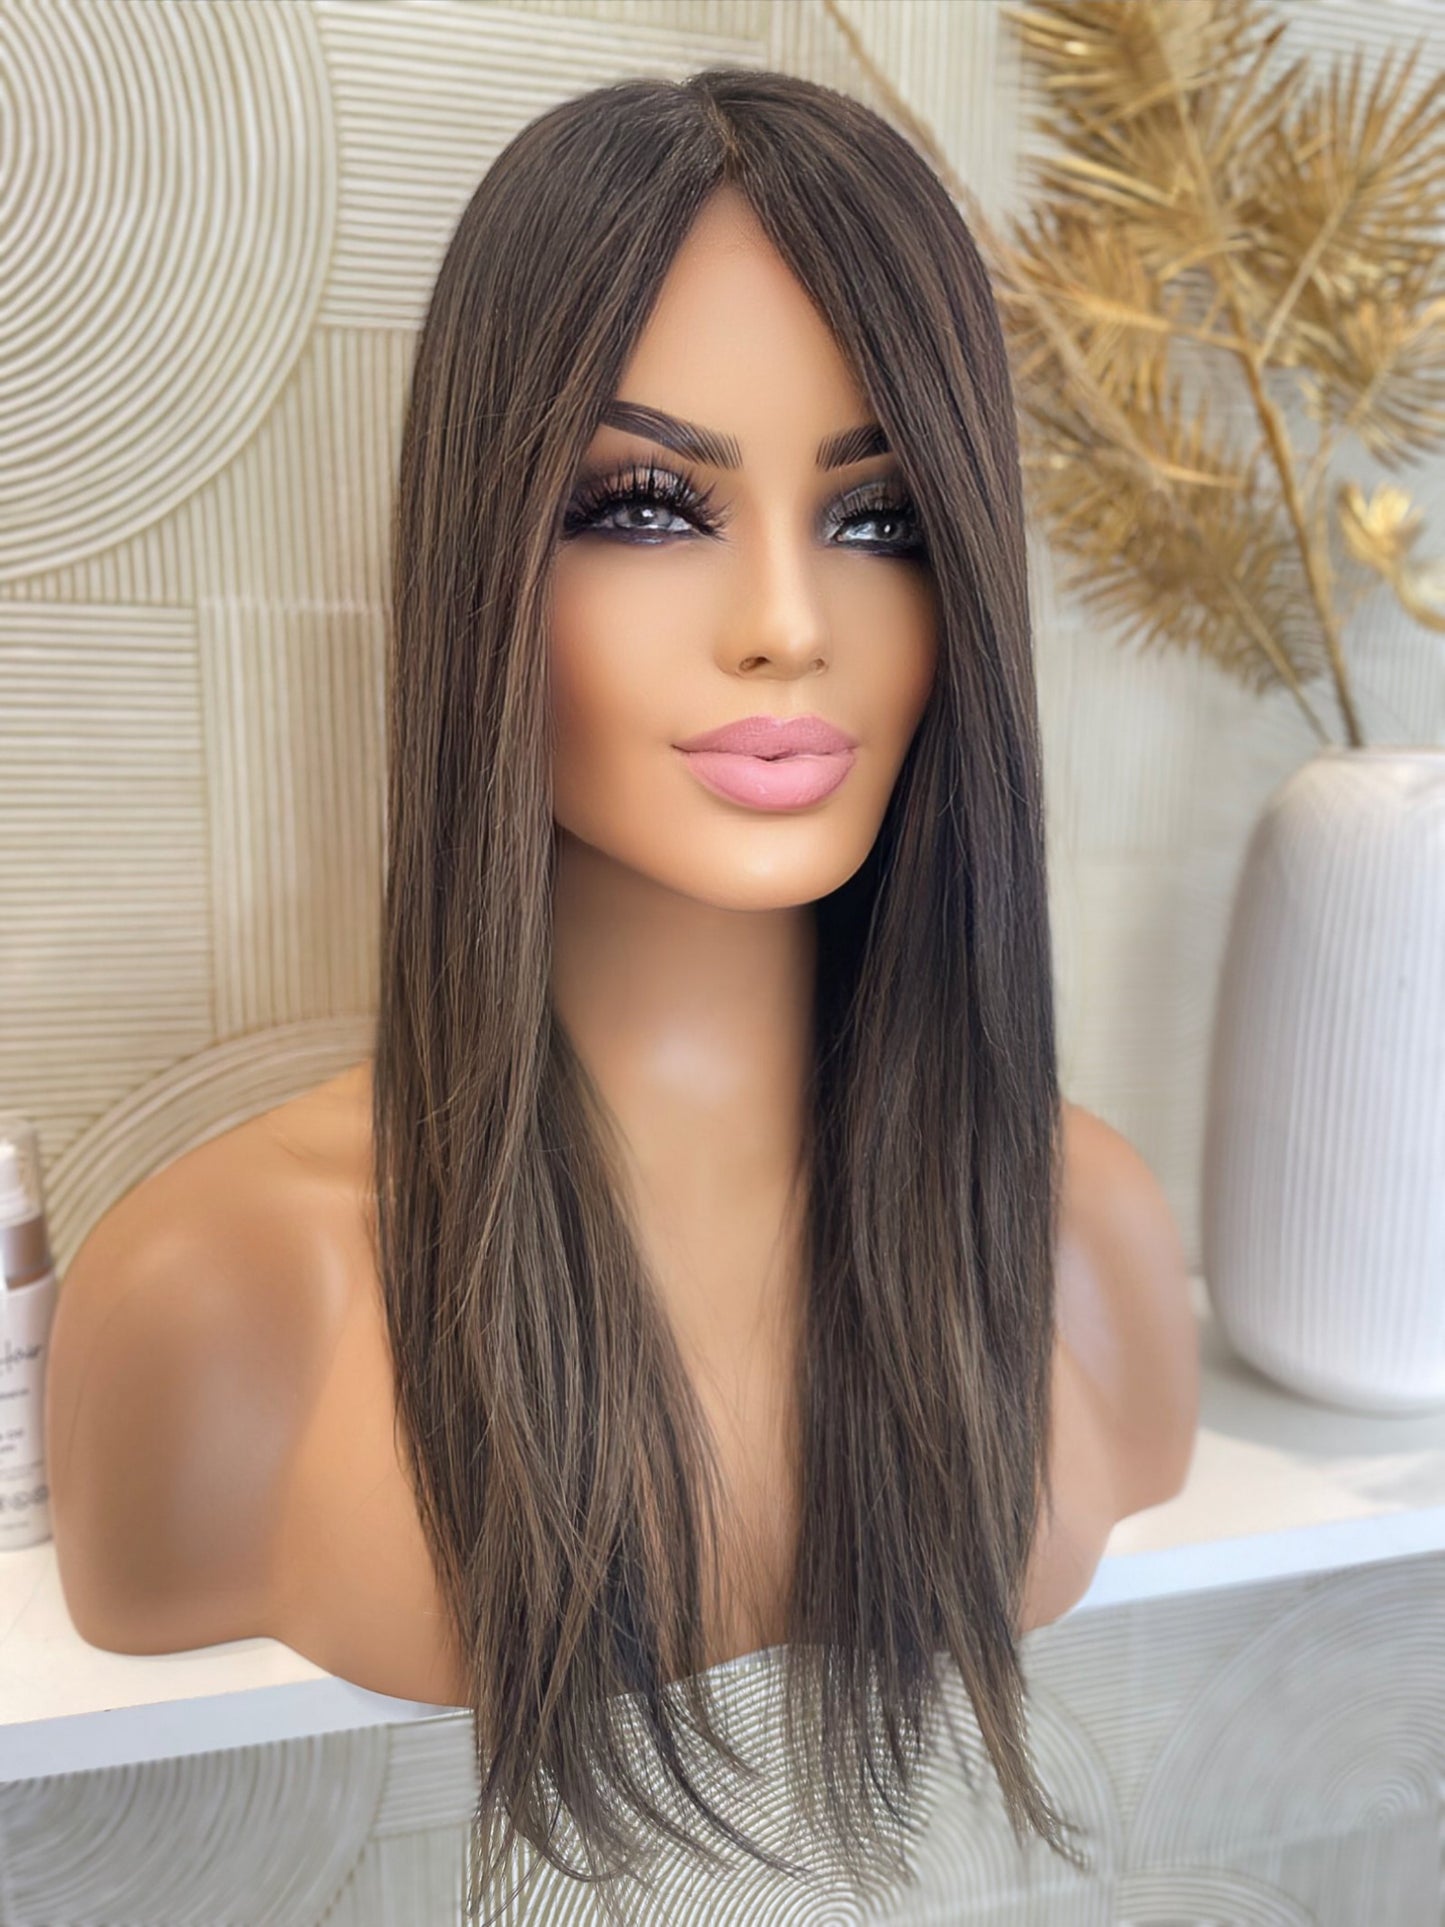 Chyna - confort integral + skin top/ 20 inch / 130 % volume / Mongolian hair / Small